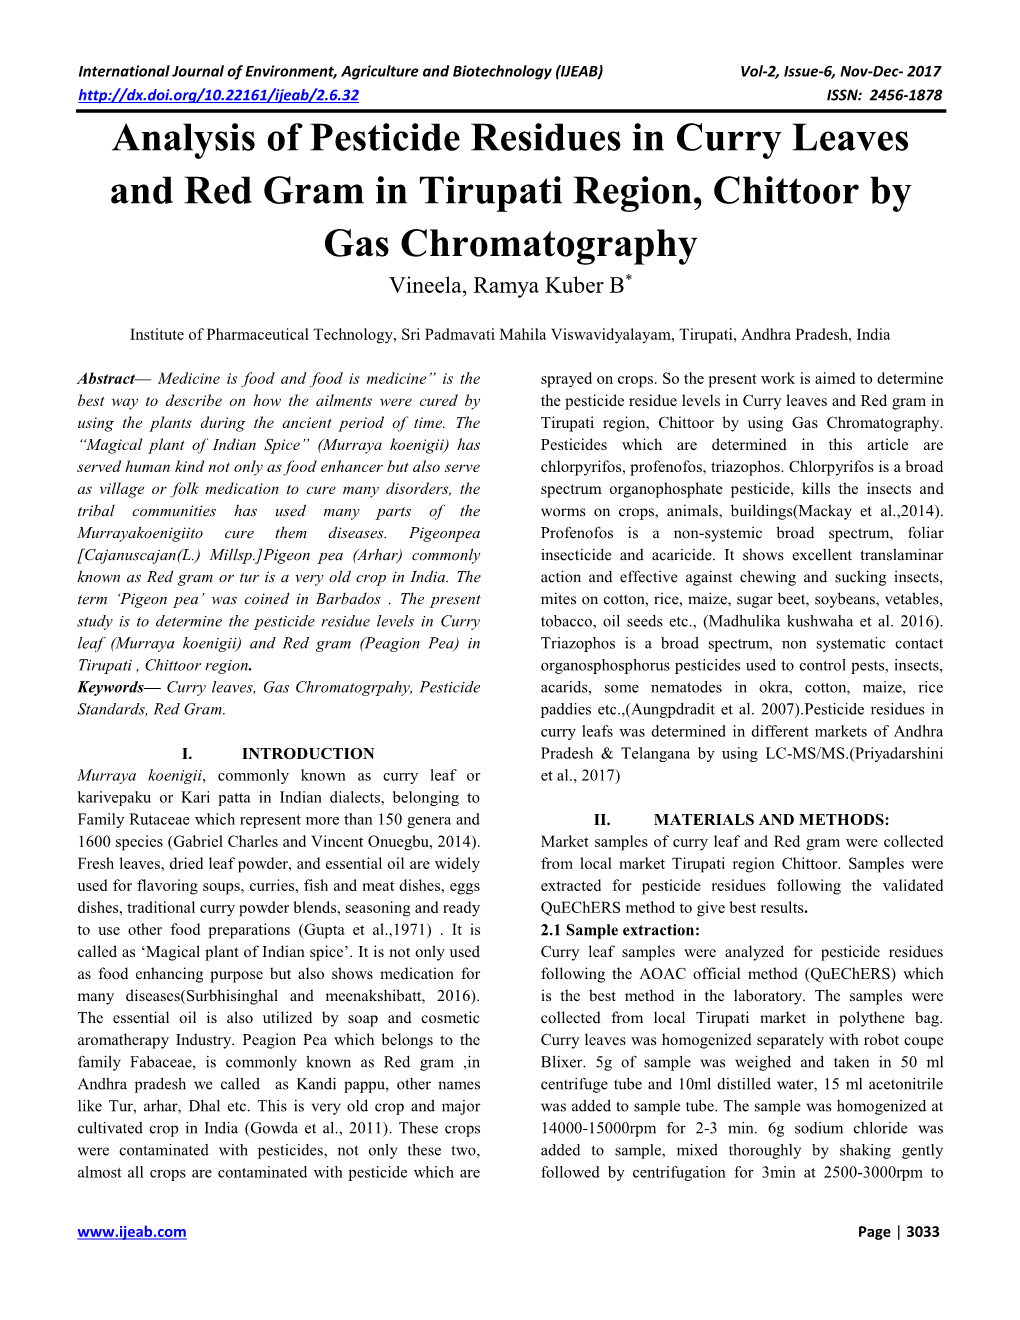 Analysis of Pesticide Residues in Curry Leaves and Red Gram in Tirupati Region, Chittoor by Gas Chromatography Vineela, Ramya Kuber B*